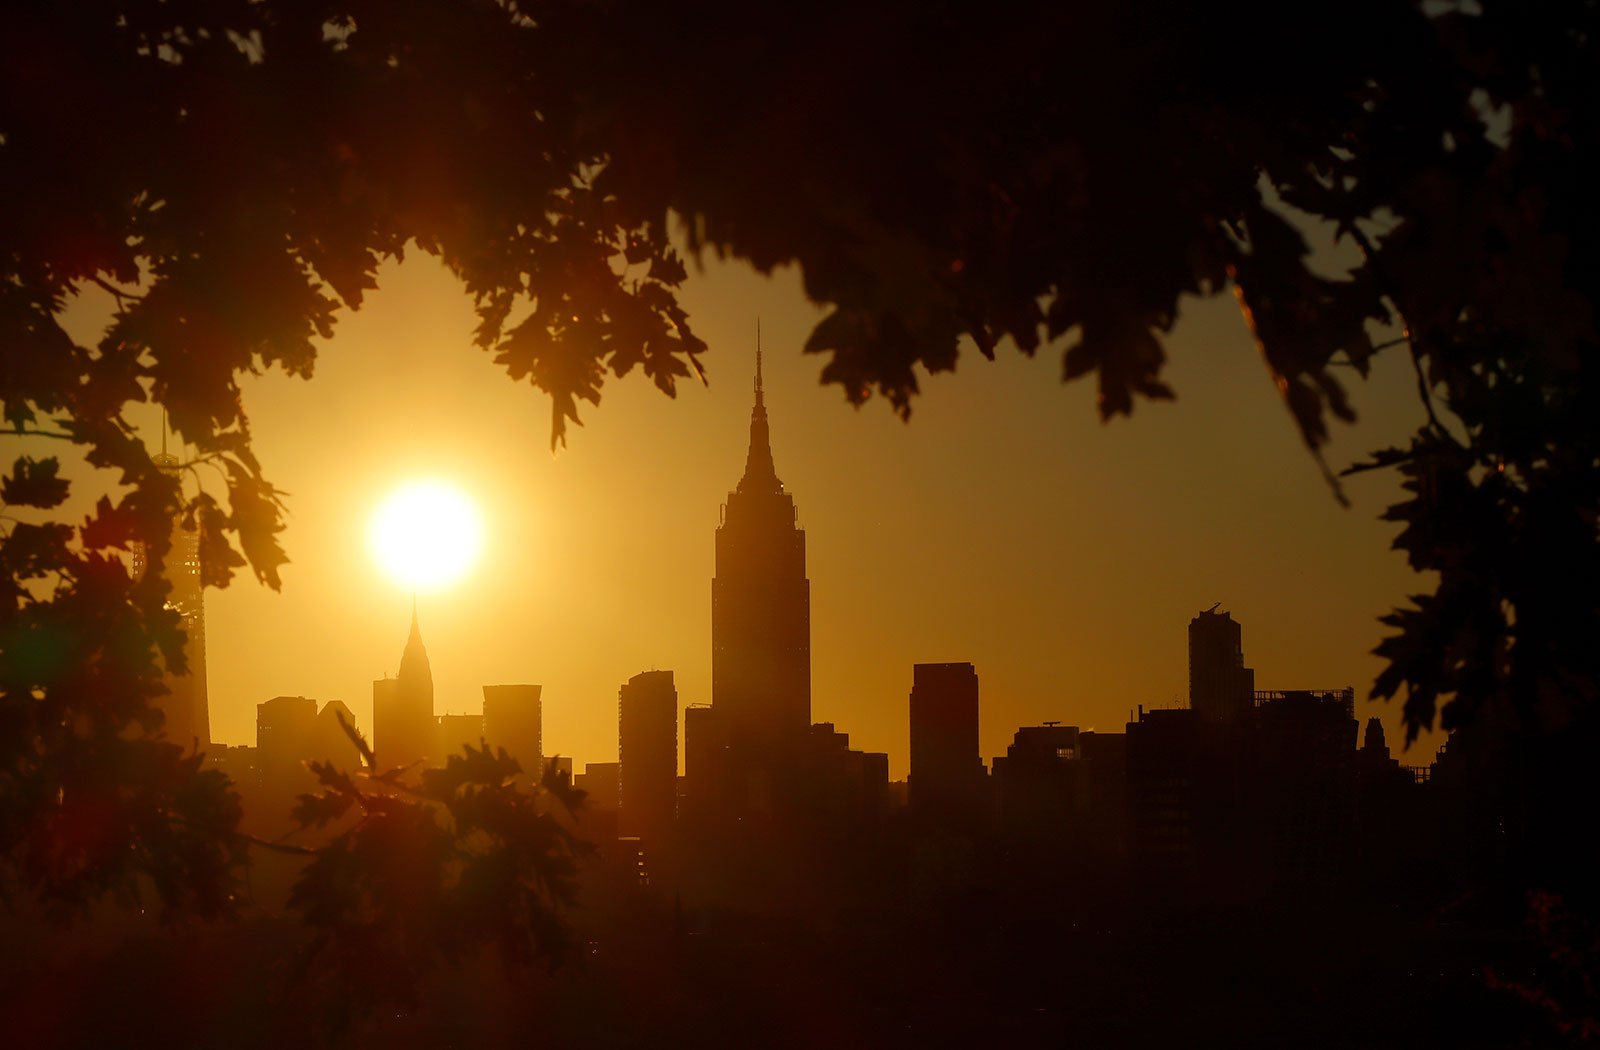 NYC skyline silhouette framed by trees  